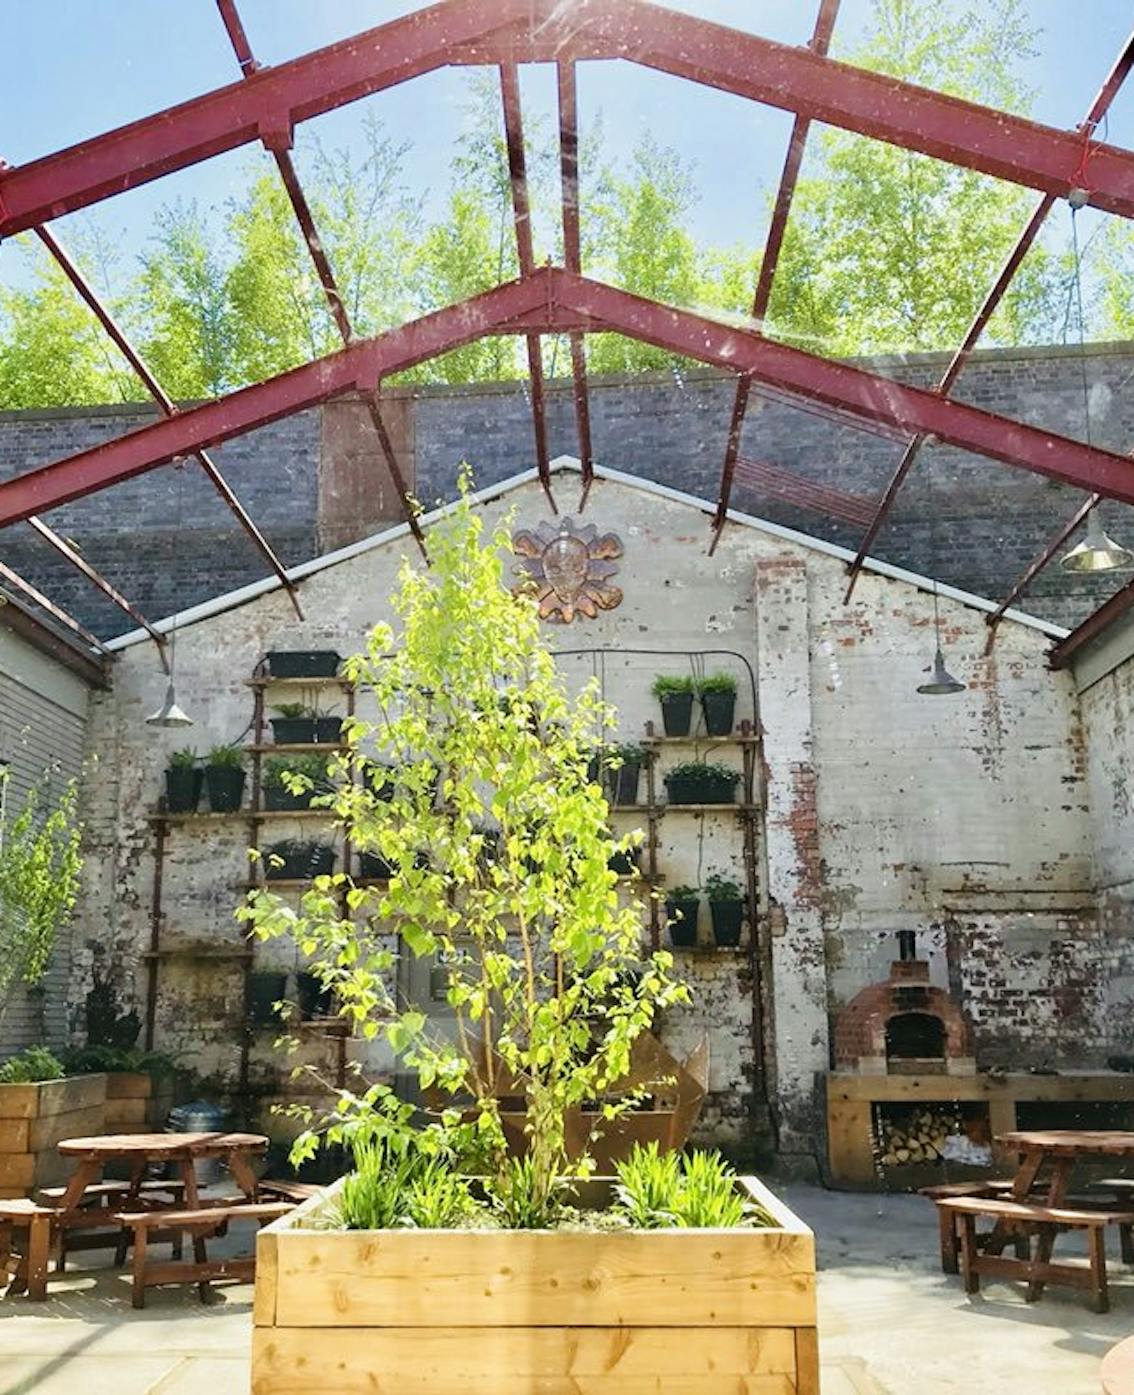 An open courtyard with a red steel roof beams, a green tree sits in the centre basking in the sunlight